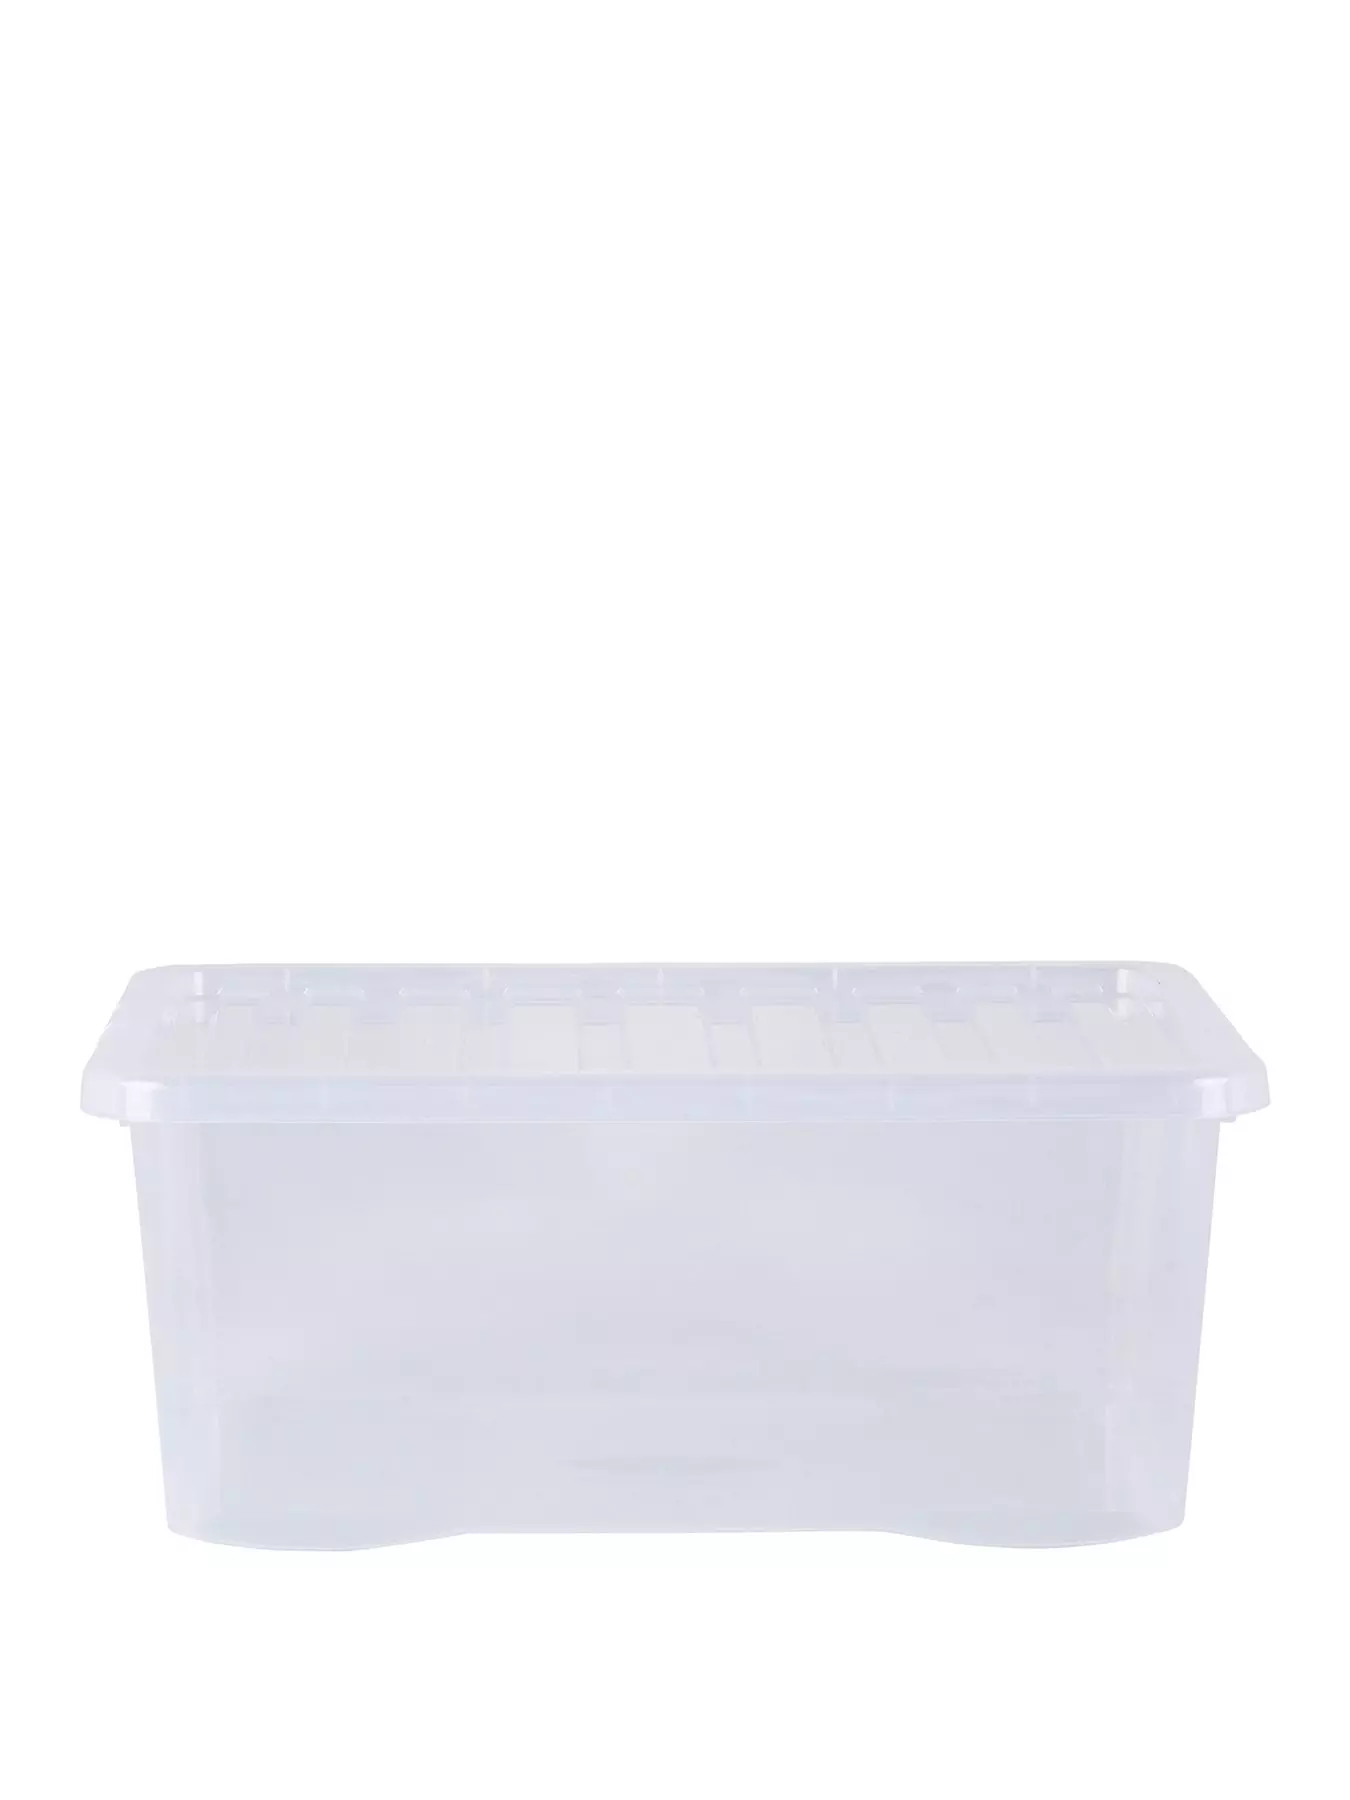 96 ltr Clear Plastic Storage Bin Tote Organizing Container with Durable Lid  (Pack of 3), Clear Stackable & Nestable Totes, Clear Plastic Tote W/Latch